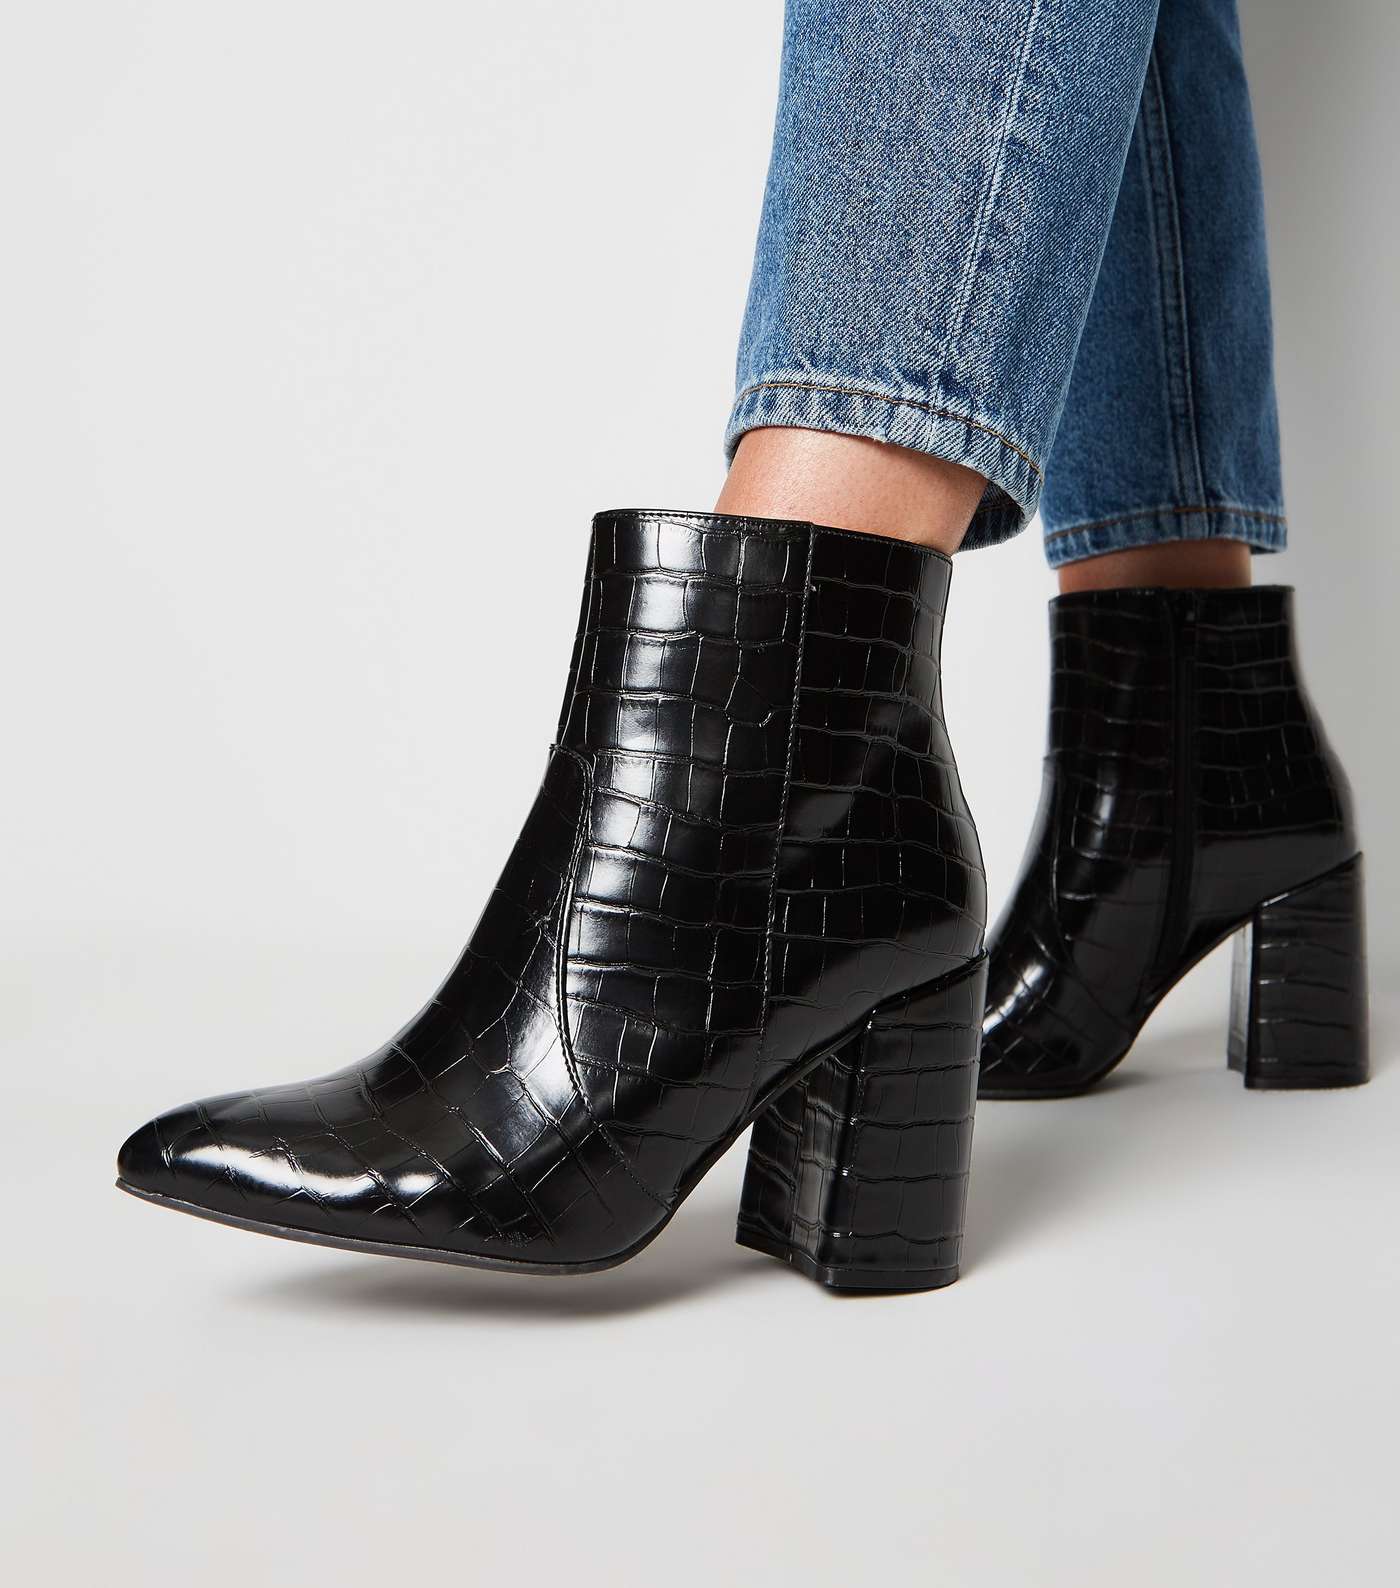 Wide Fit Black Faux Croc Flared Heel Boots Image 2